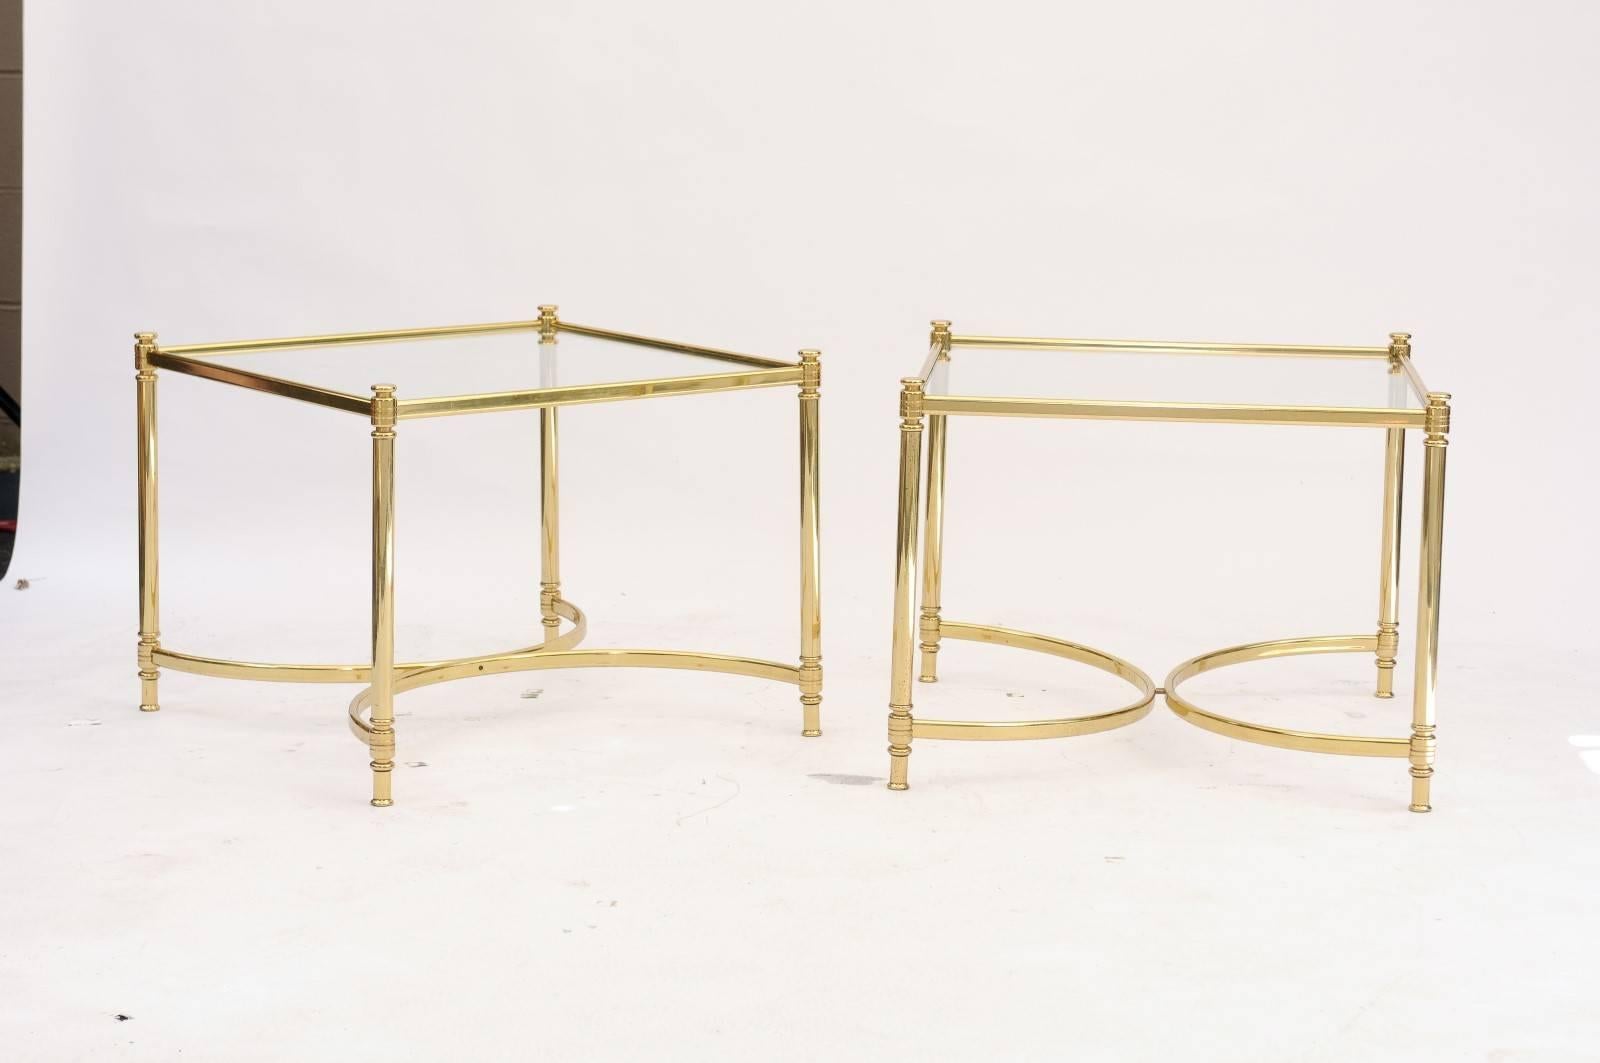 A pair of Mid-Century Modern French square brass and glass side tables with half-moon stretchers. We love their sexy but Classic vibe, and the interlocking demi-circles add a fanciful touch. Their linear silhouettes are indeed softened by the gentle